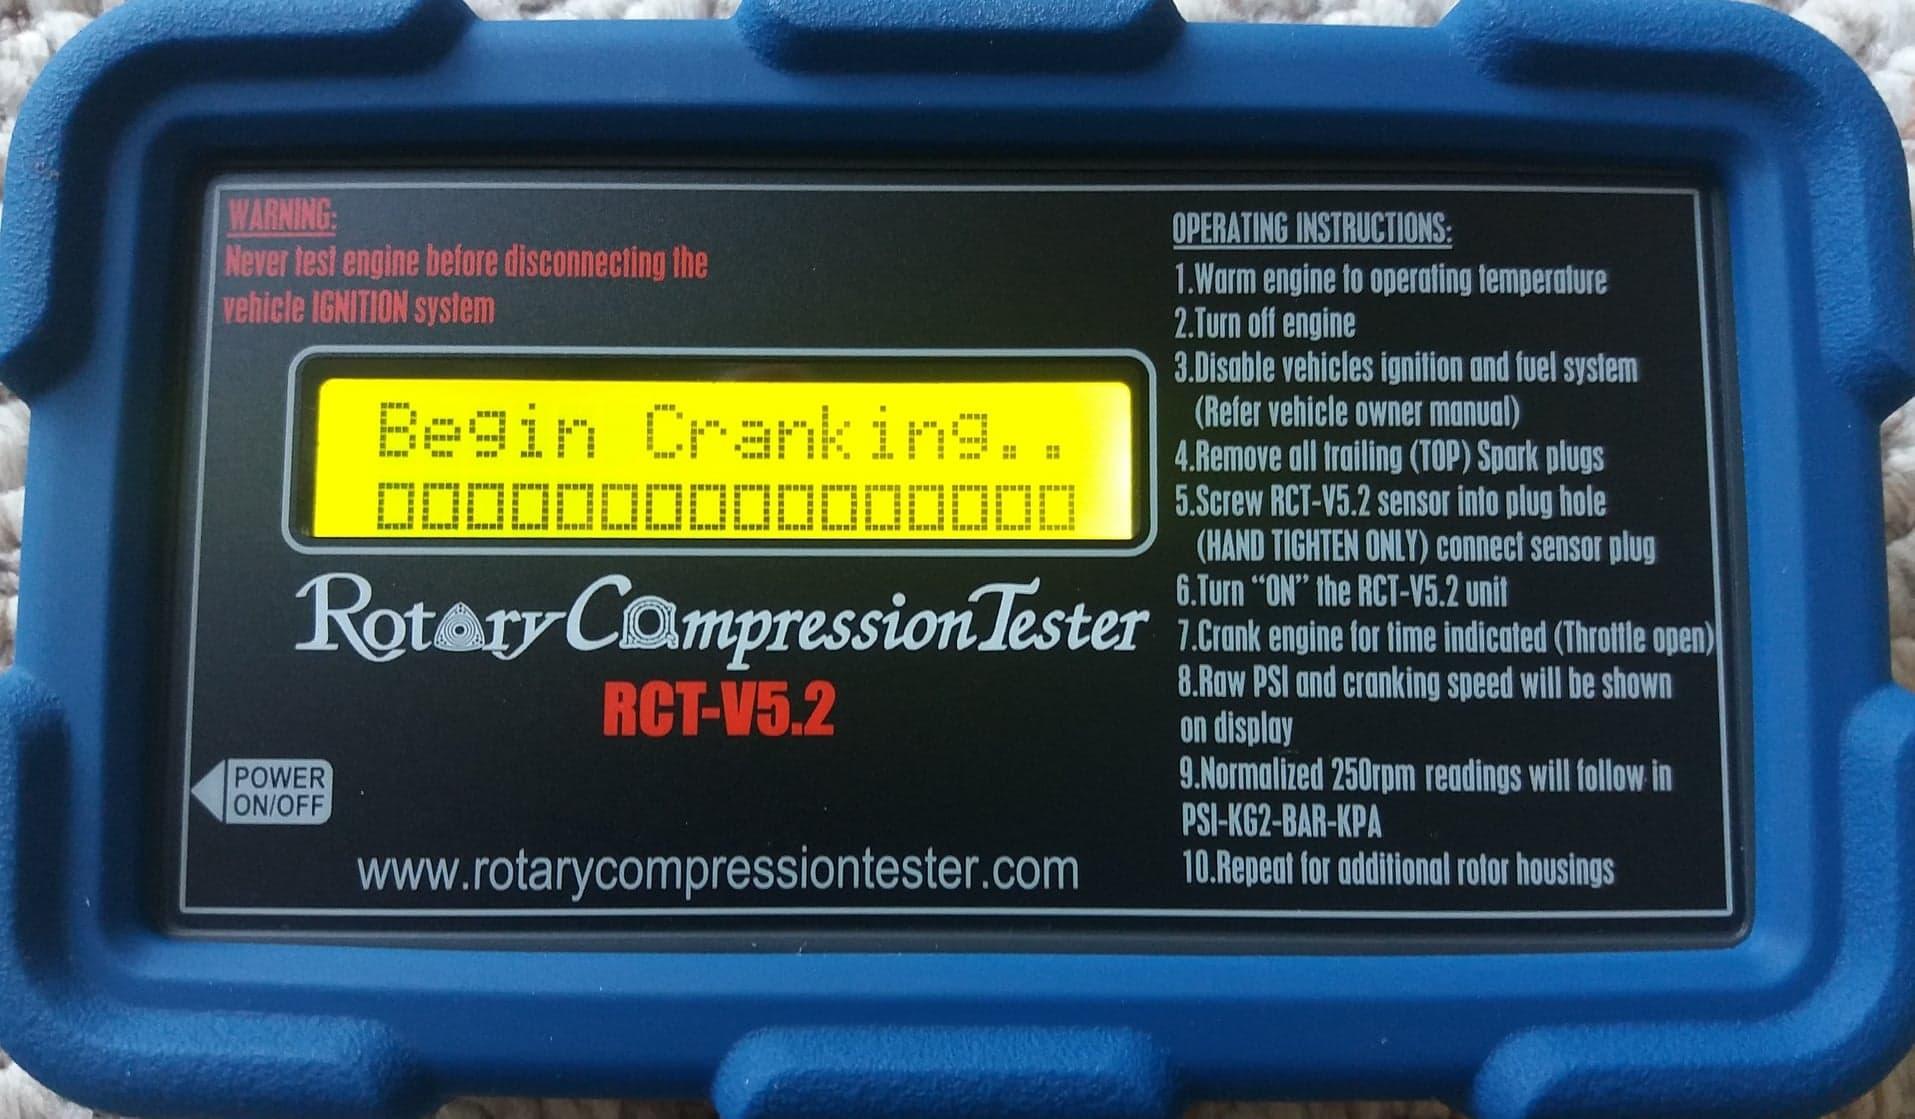 Rotary Compression Tester RCTV5.2 from Tuned By Shawn